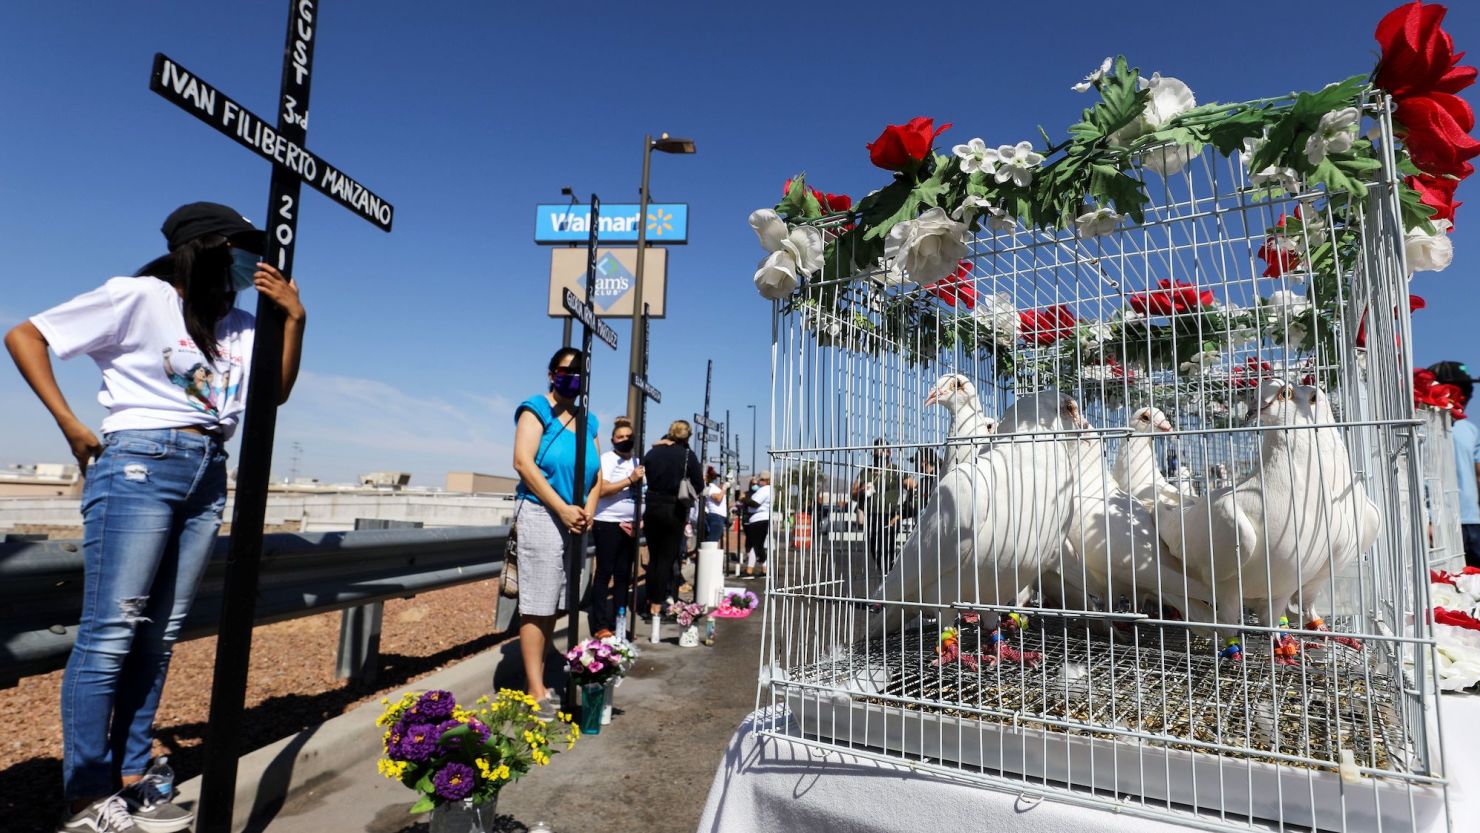 On the one-year anniversary of the event, 23 doves awaited release as mourners held crosses honoring those killed in the Walmart shooting that left 23 people dead in a racist attack targeting Latinos on August 3, 2020, in El Paso, Texas.